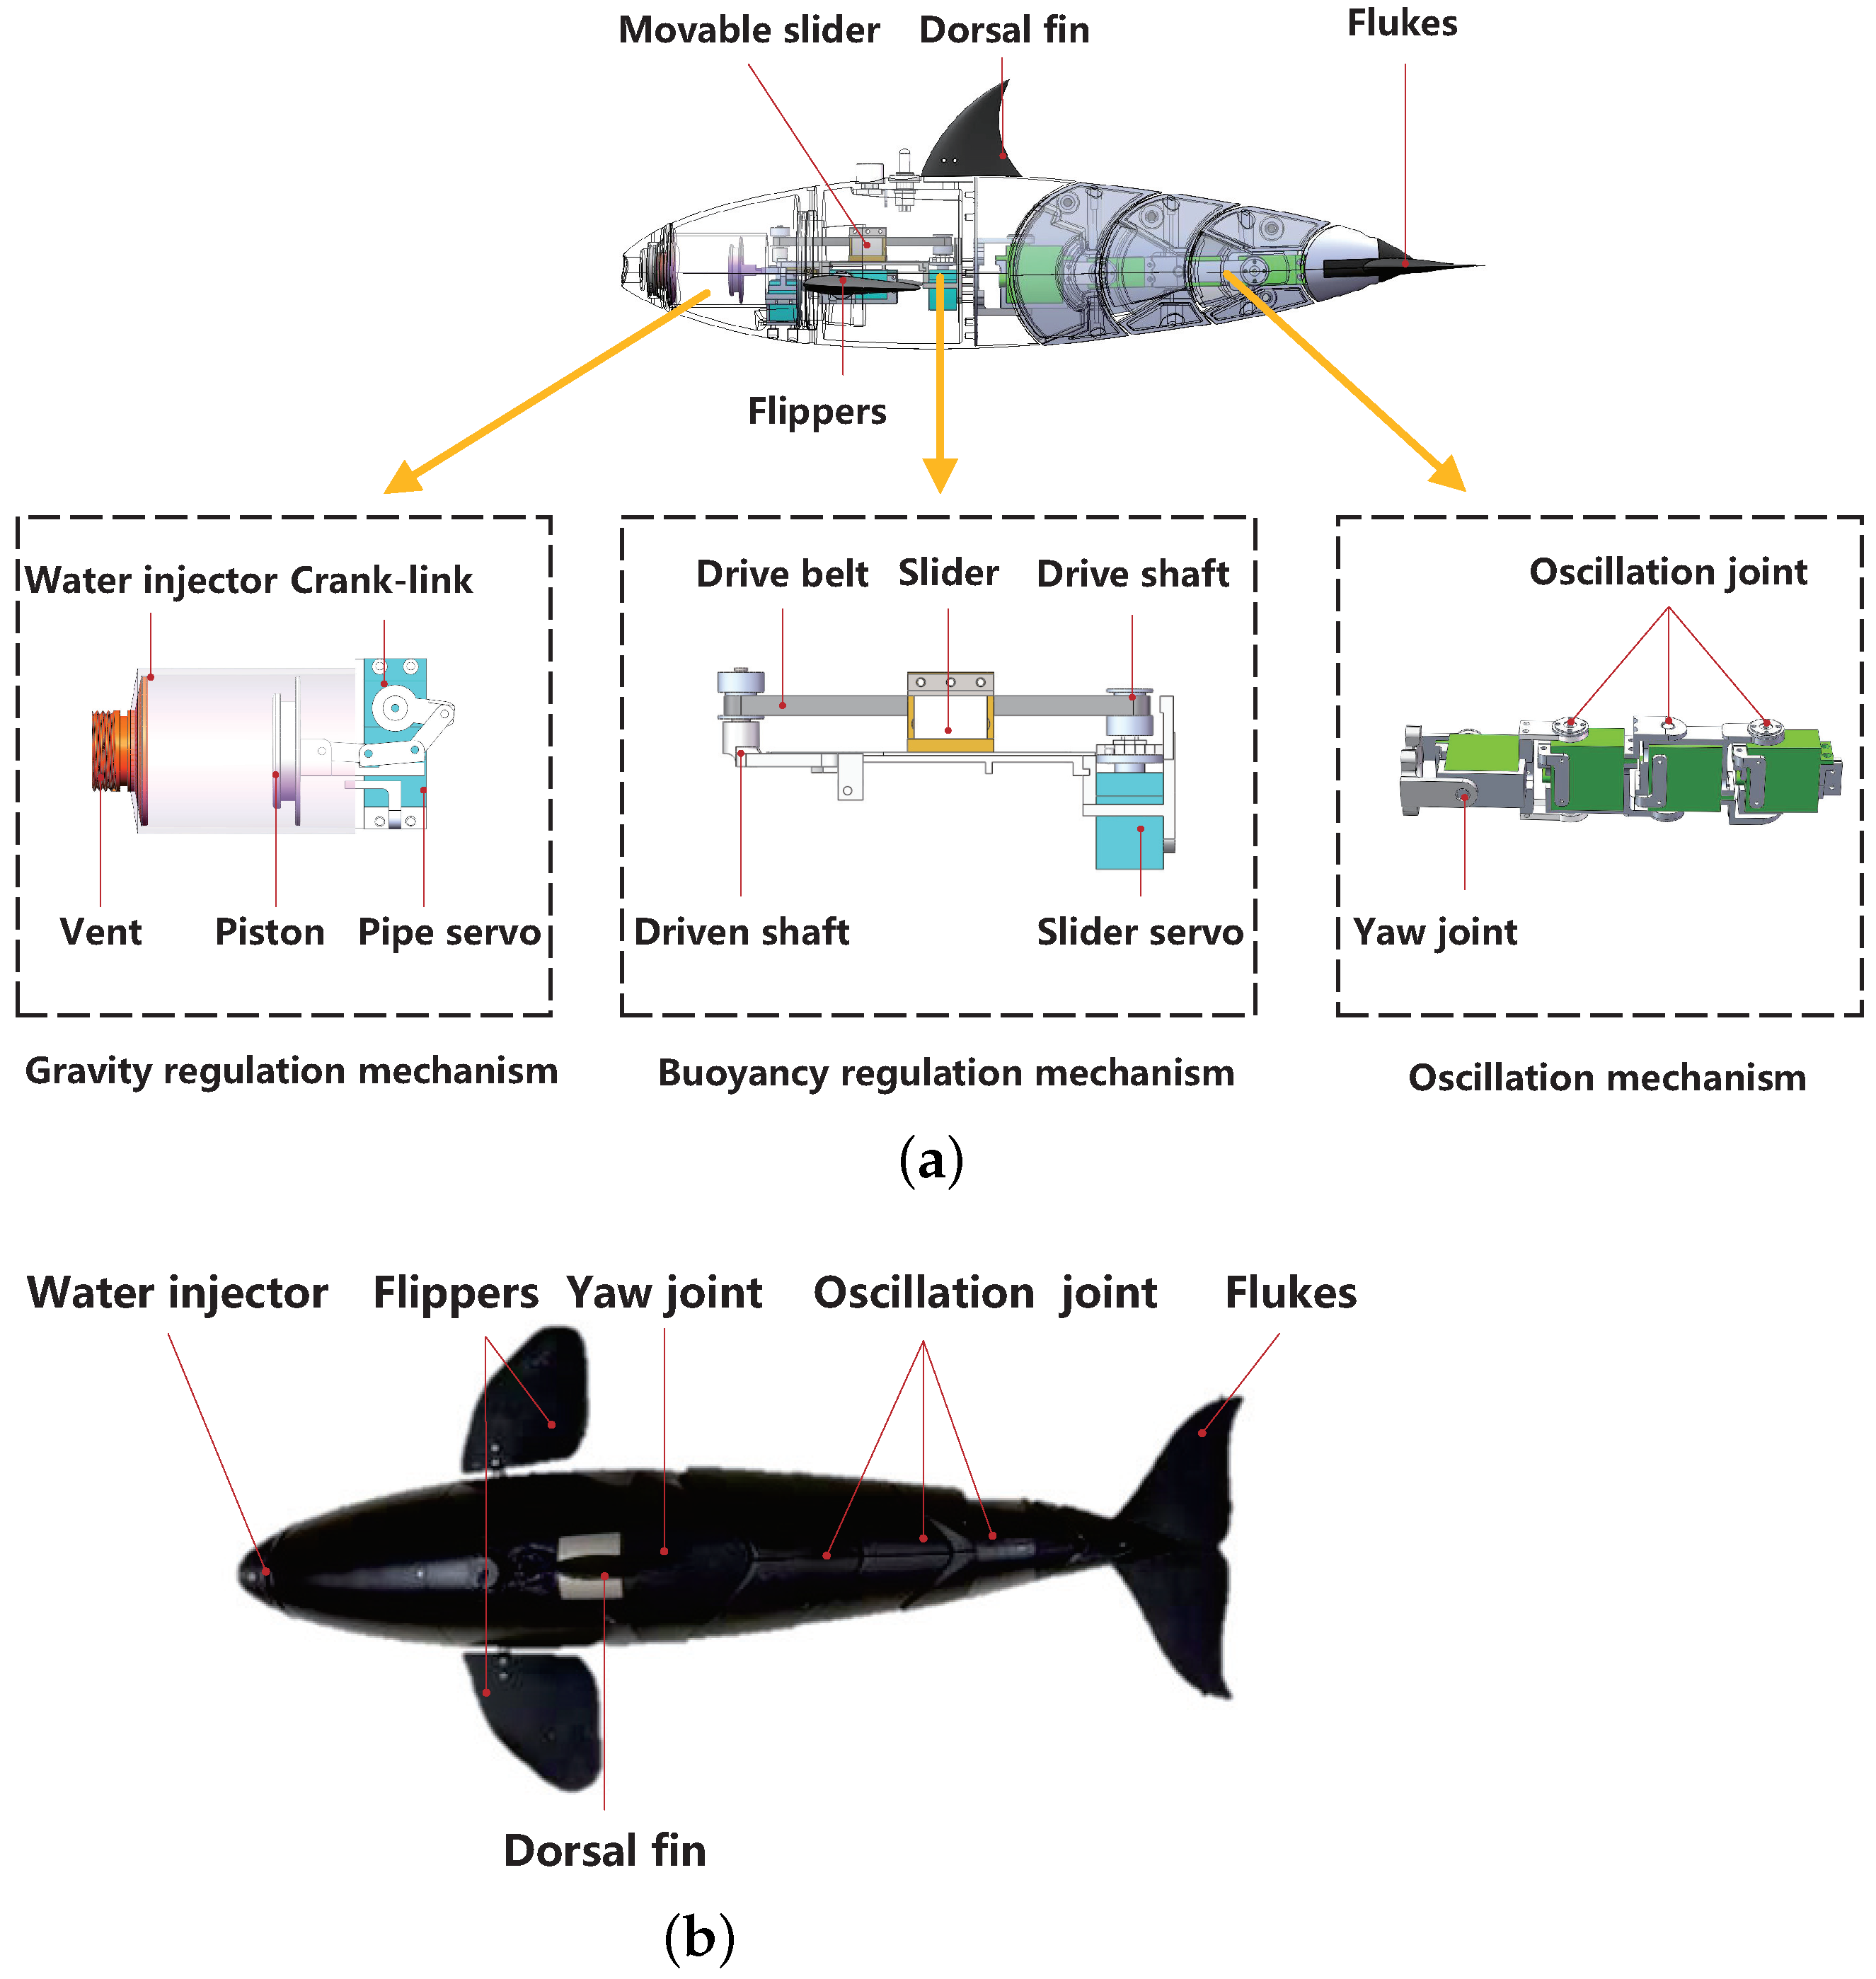 Mechanical and hardware configurations of the robotic fish: (a